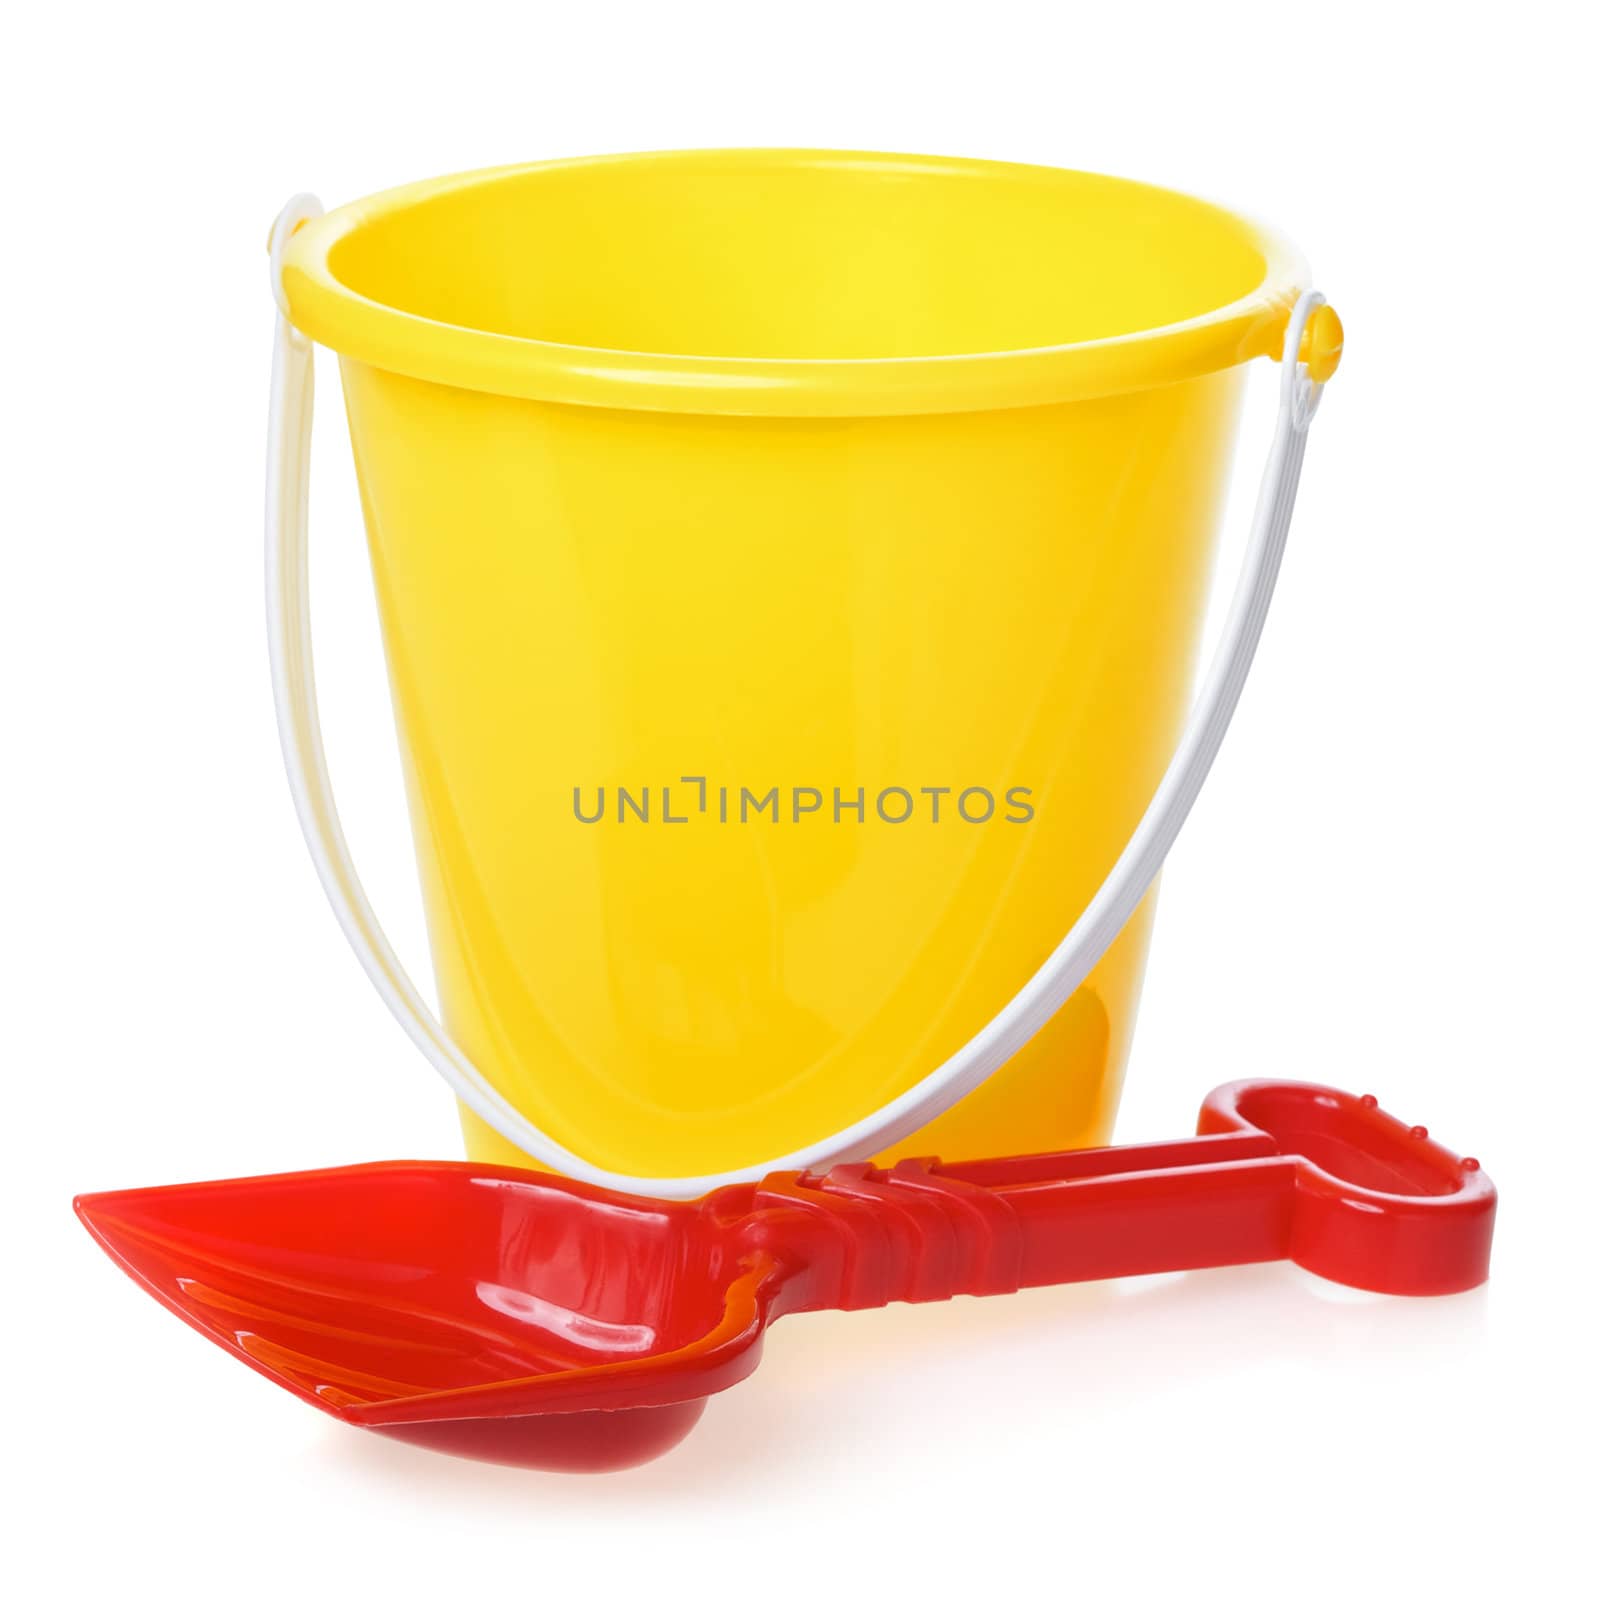 yellow toy bucket and red scoop, isolated on white